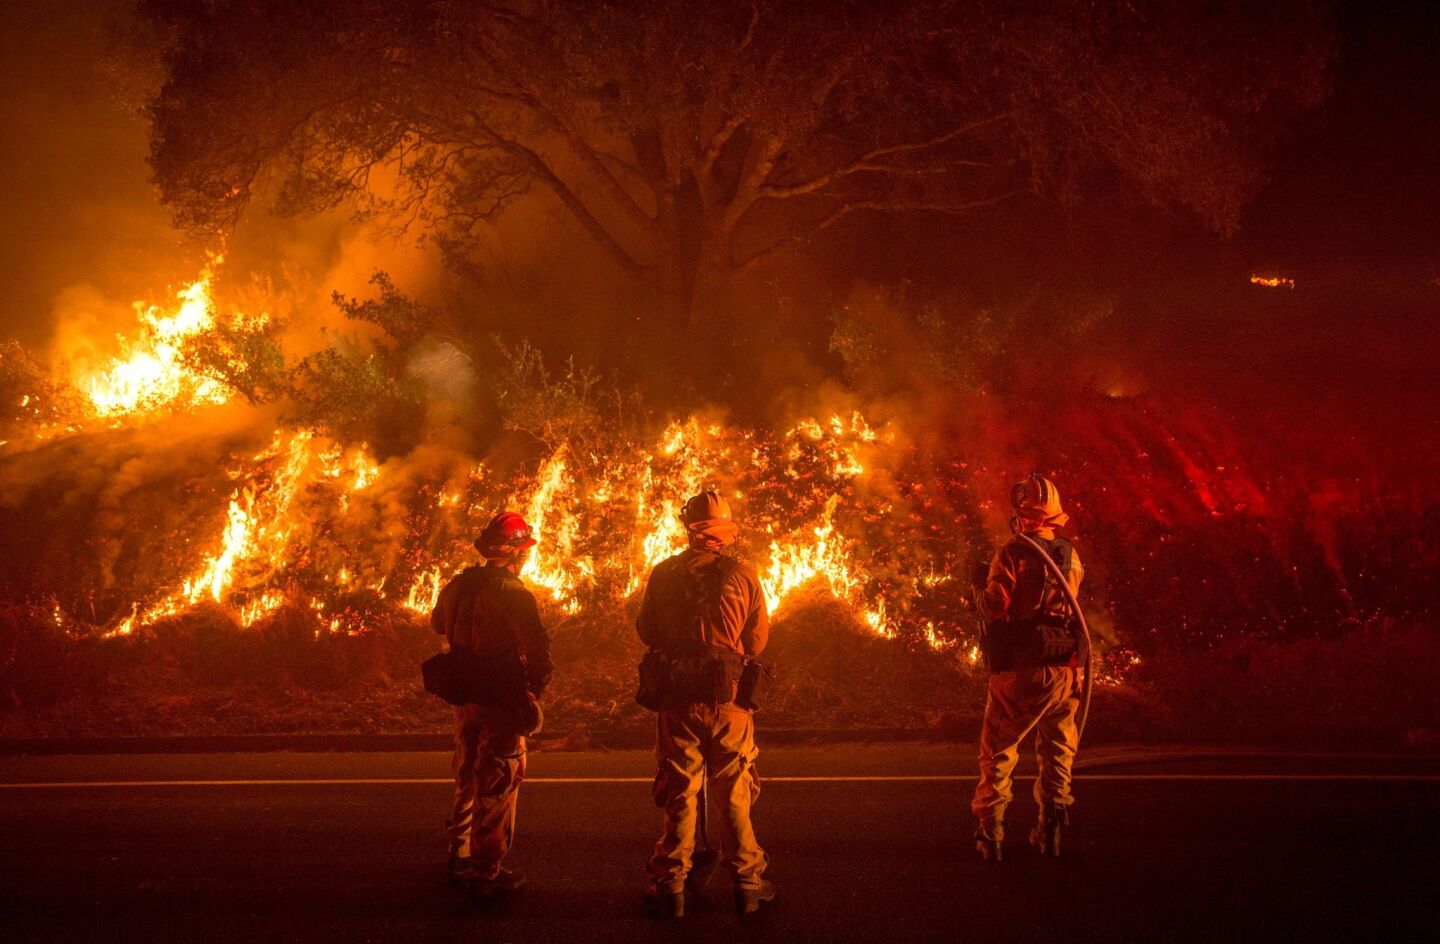 Firefighters monitor flames on the side of a road July 18 near Mariposa, Calif.